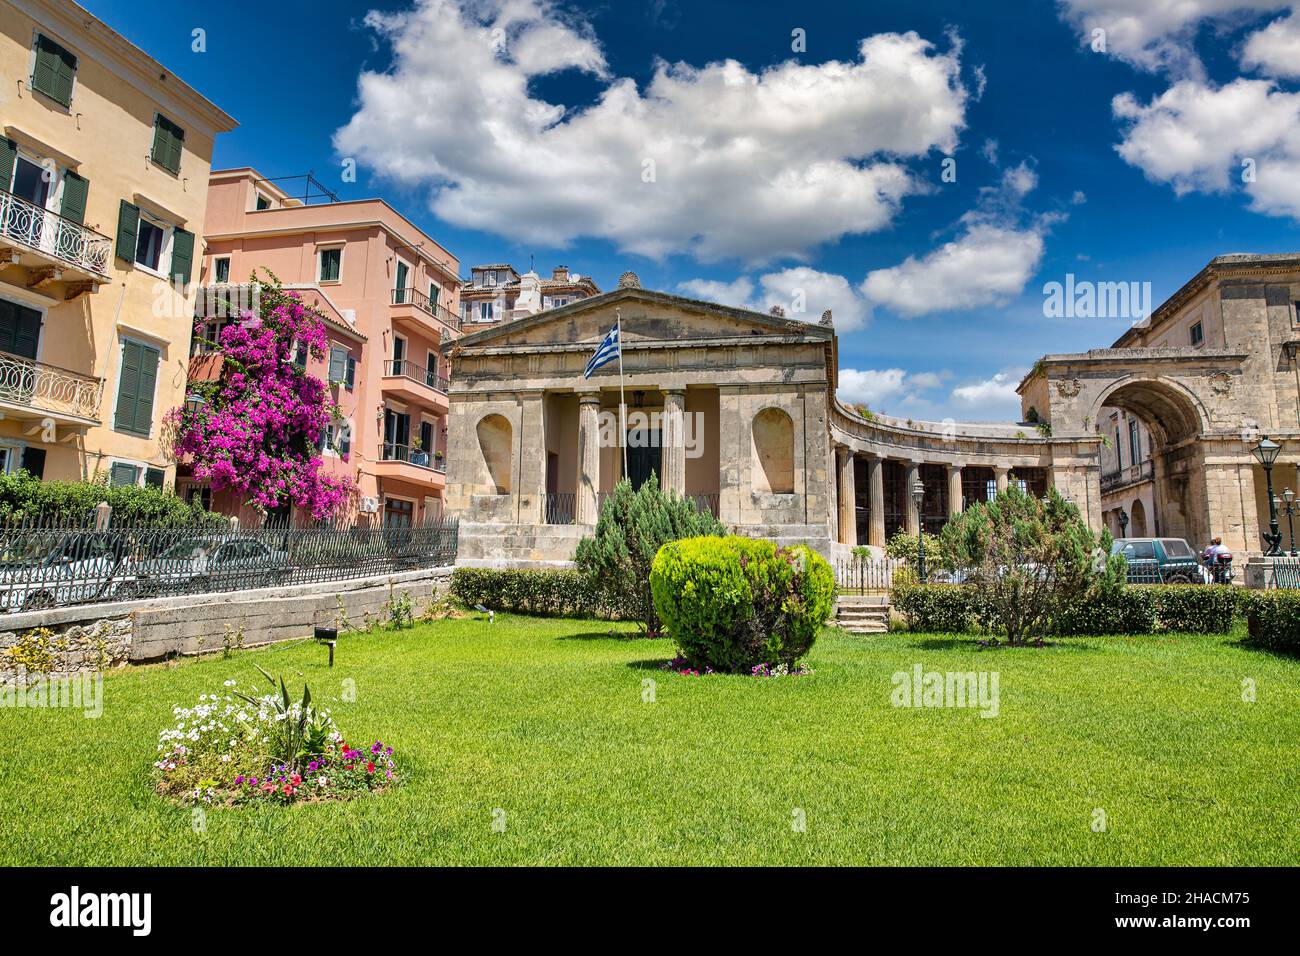 Corfu Museum of Asian Art facade, Greece. It was built as palace in 1824, as unification parlament of Ionian islands. Stock Photo